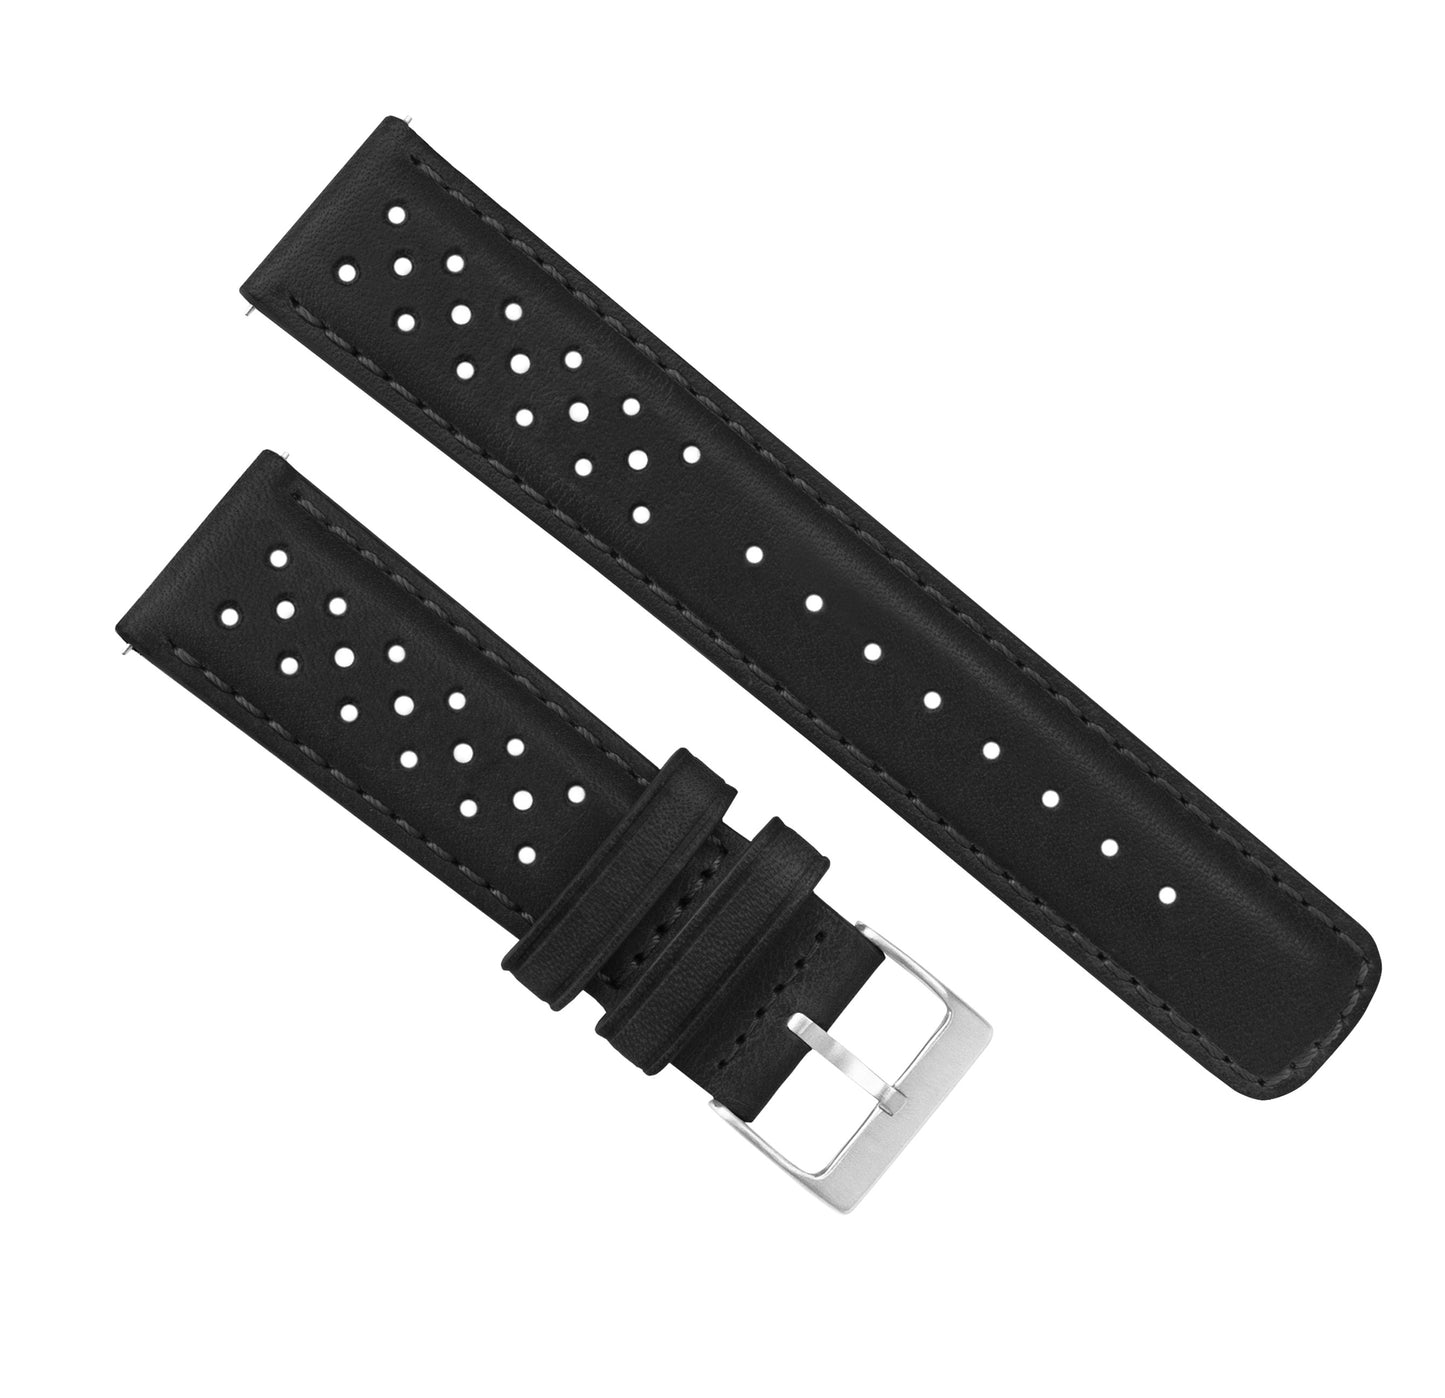 Fossil Sport | Racing Horween Leather | Black - Barton Watch Bands